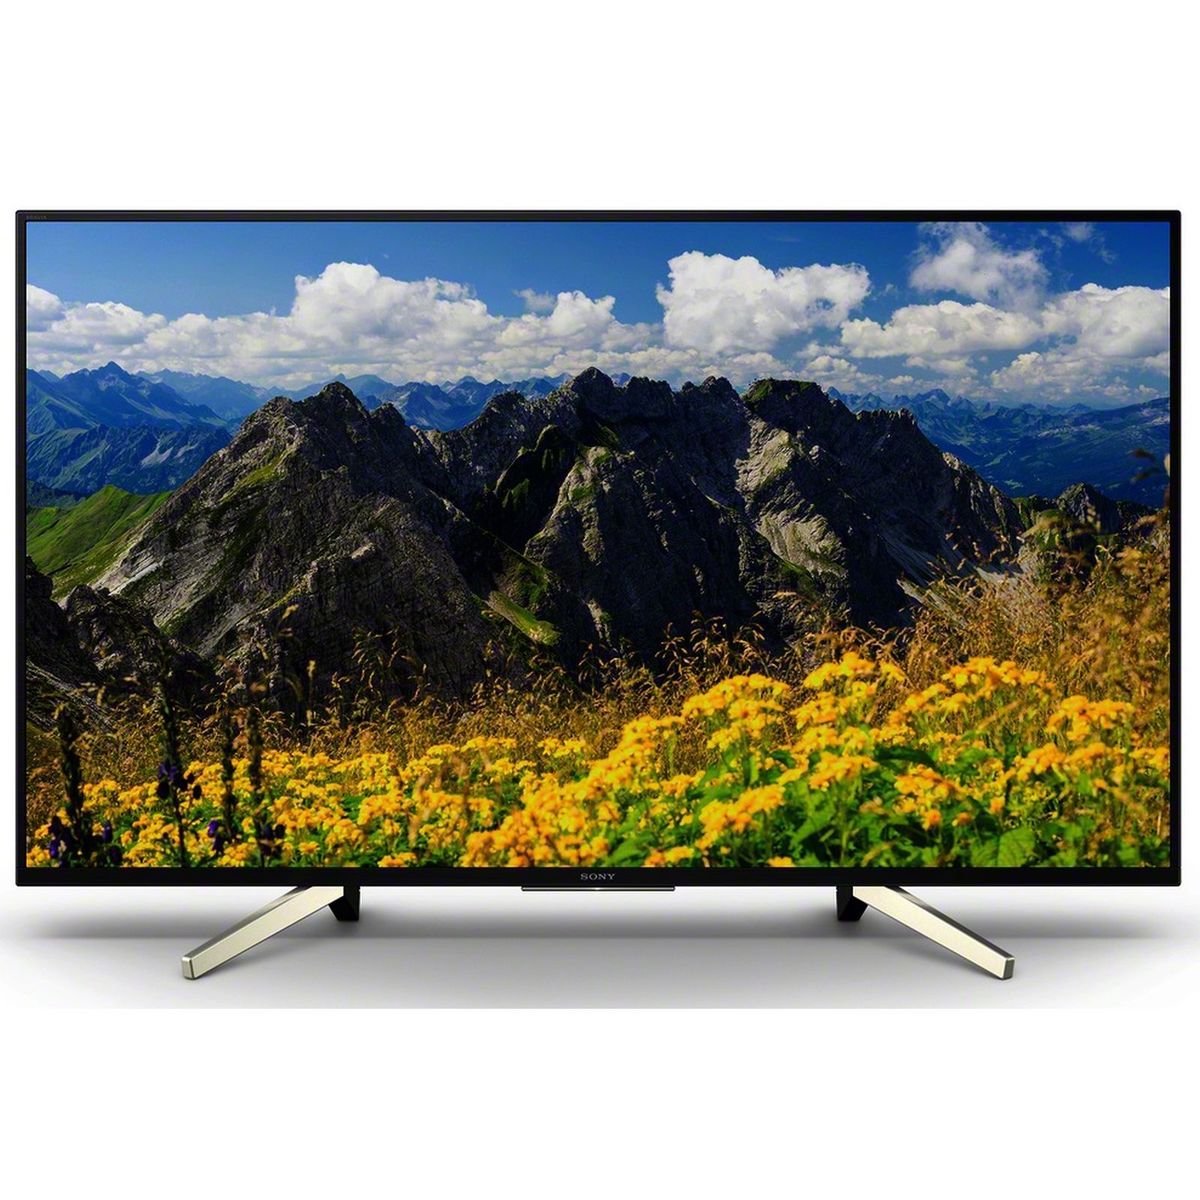 Sony 4K Ultra HD Android Smart LED TV KD65X7500F 65inch